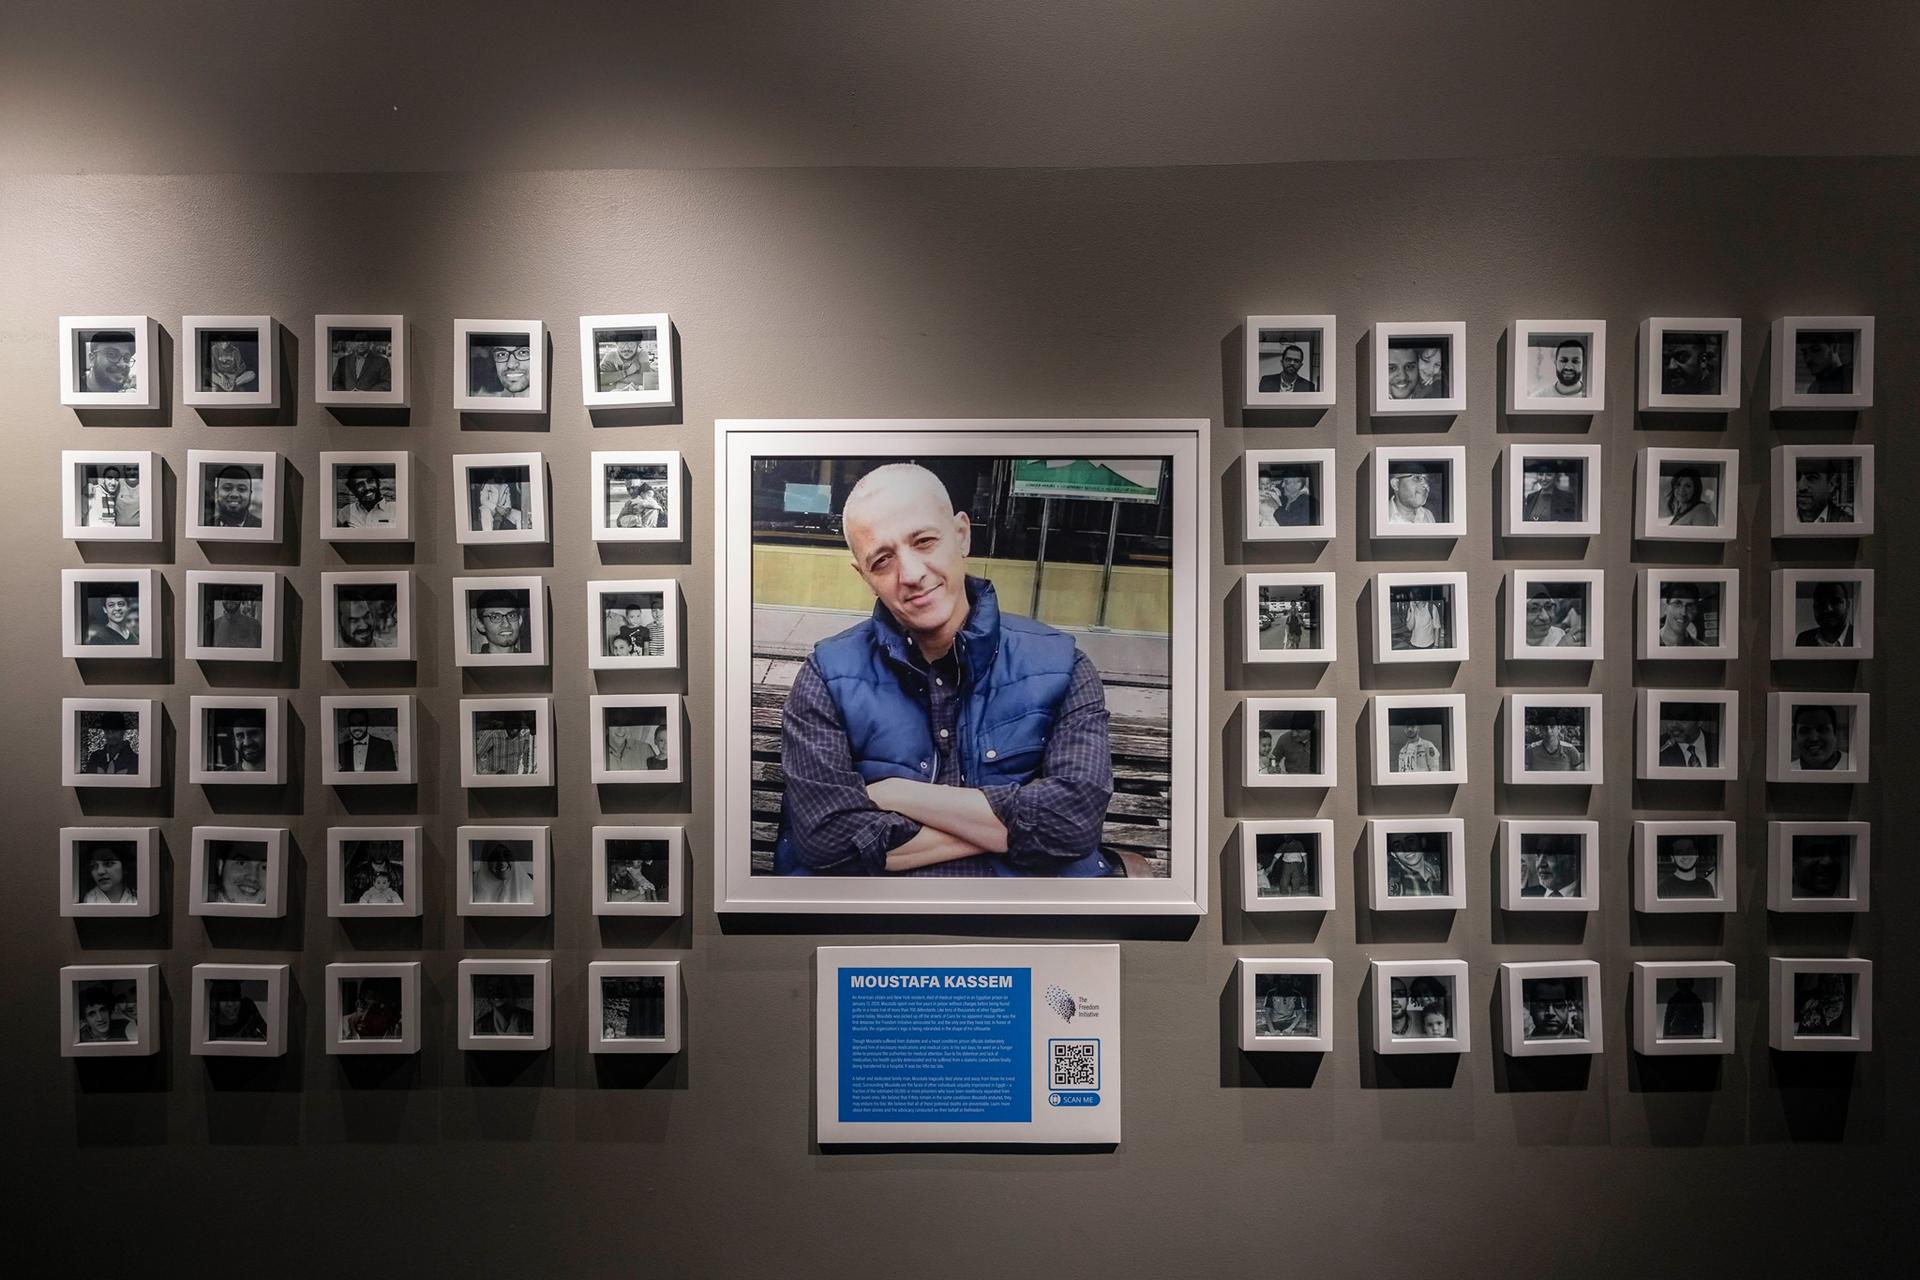 A memorial shows a photo of a man surrounded by several other frames in a gallery.